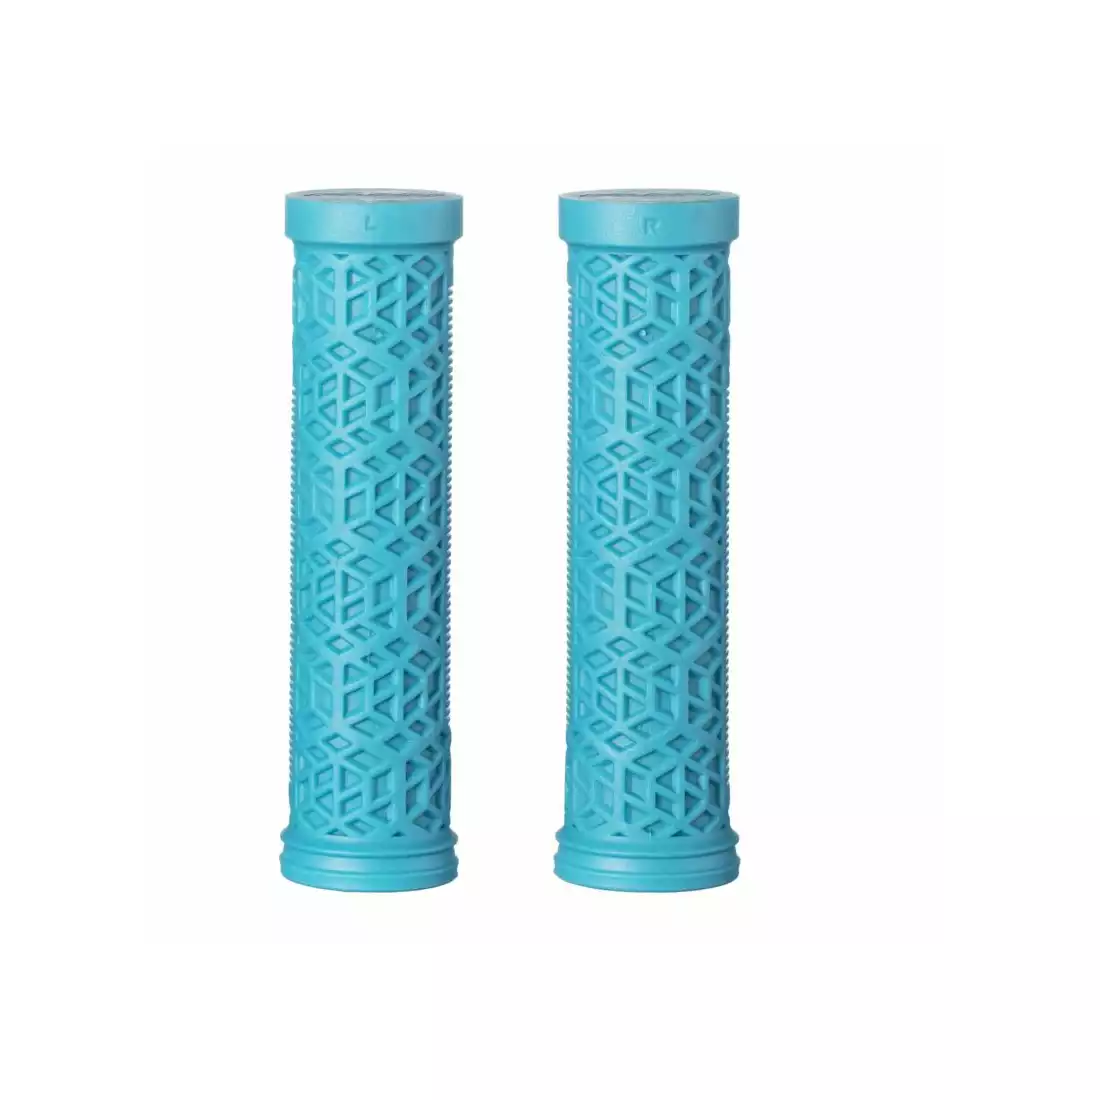 FUNN HILT ES Grips for bicycle handlebars, turquoise